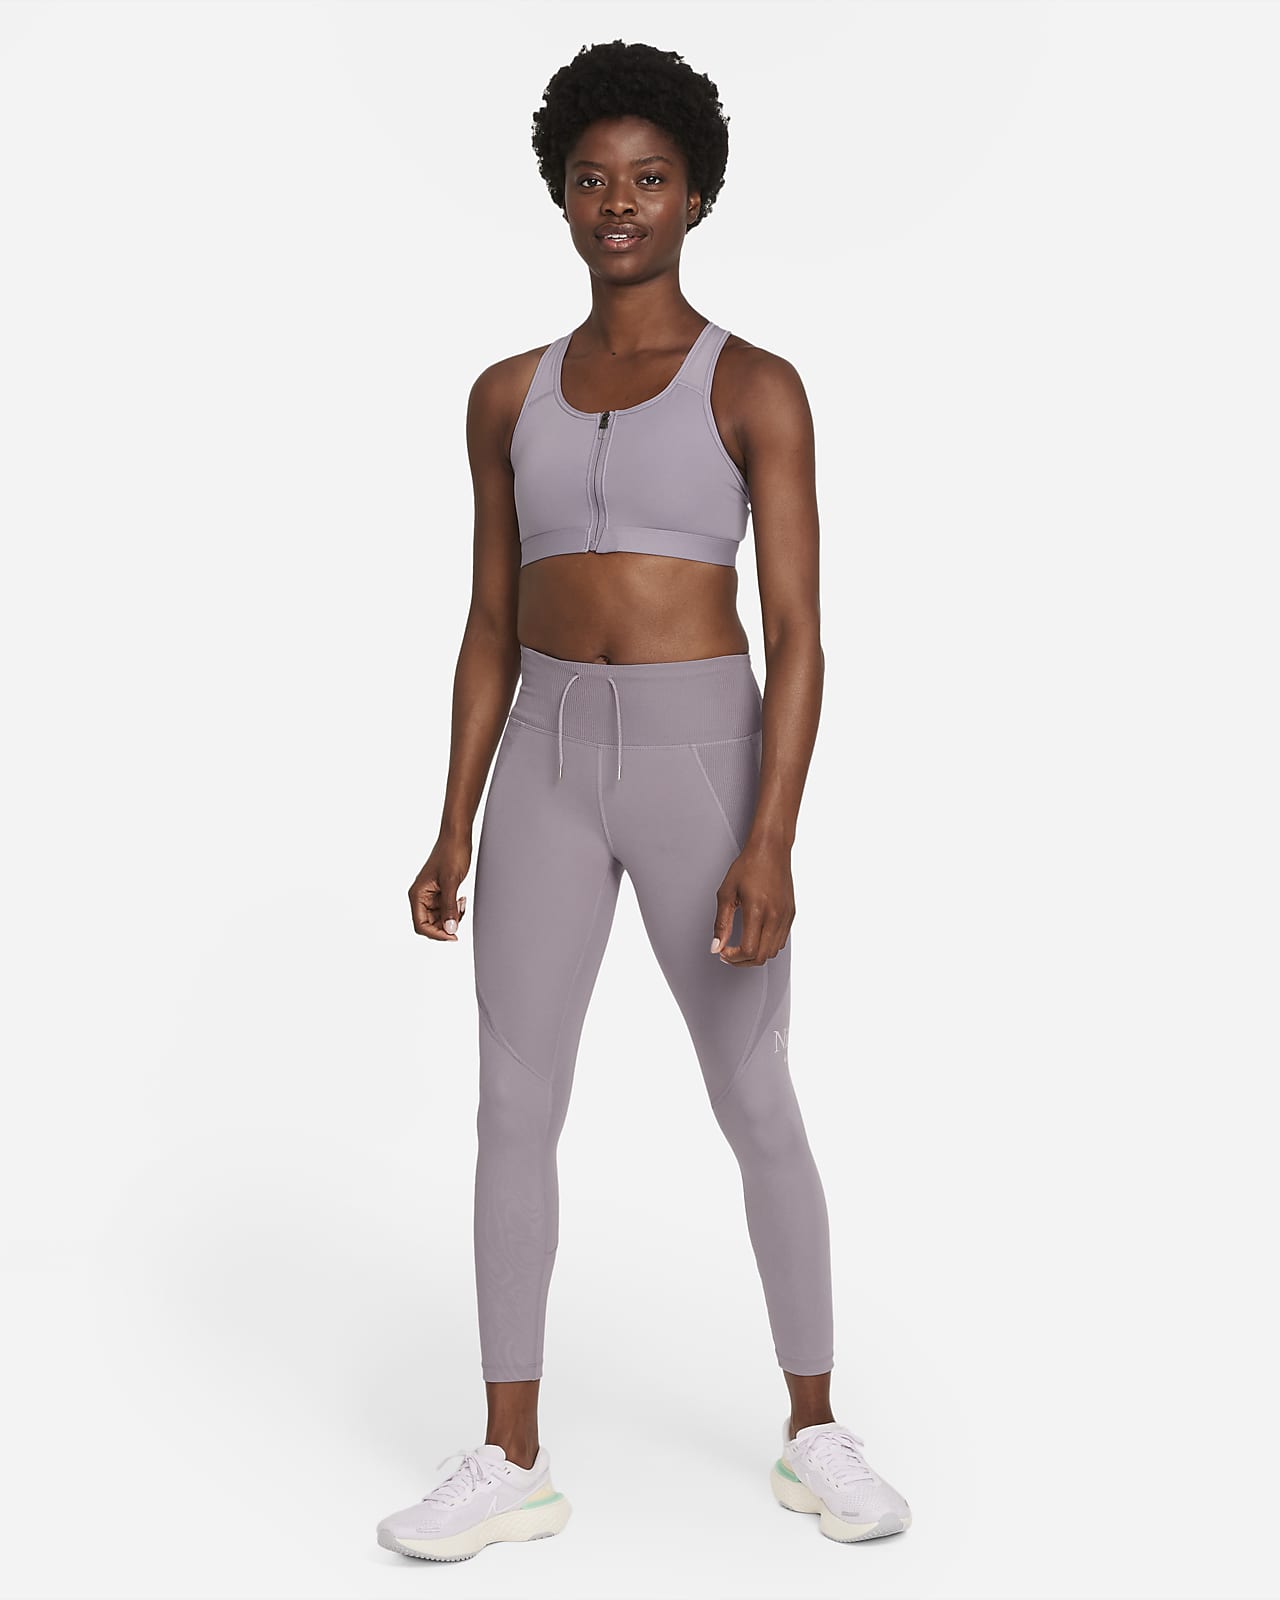 https://static.nike.com/a/images/t_PDP_1280_v1/f_auto,q_auto:eco/4772caba-9dfb-47f9-a147-a1ecf811ccf5/fast-7-8-running-leggings-5CsS6C.png